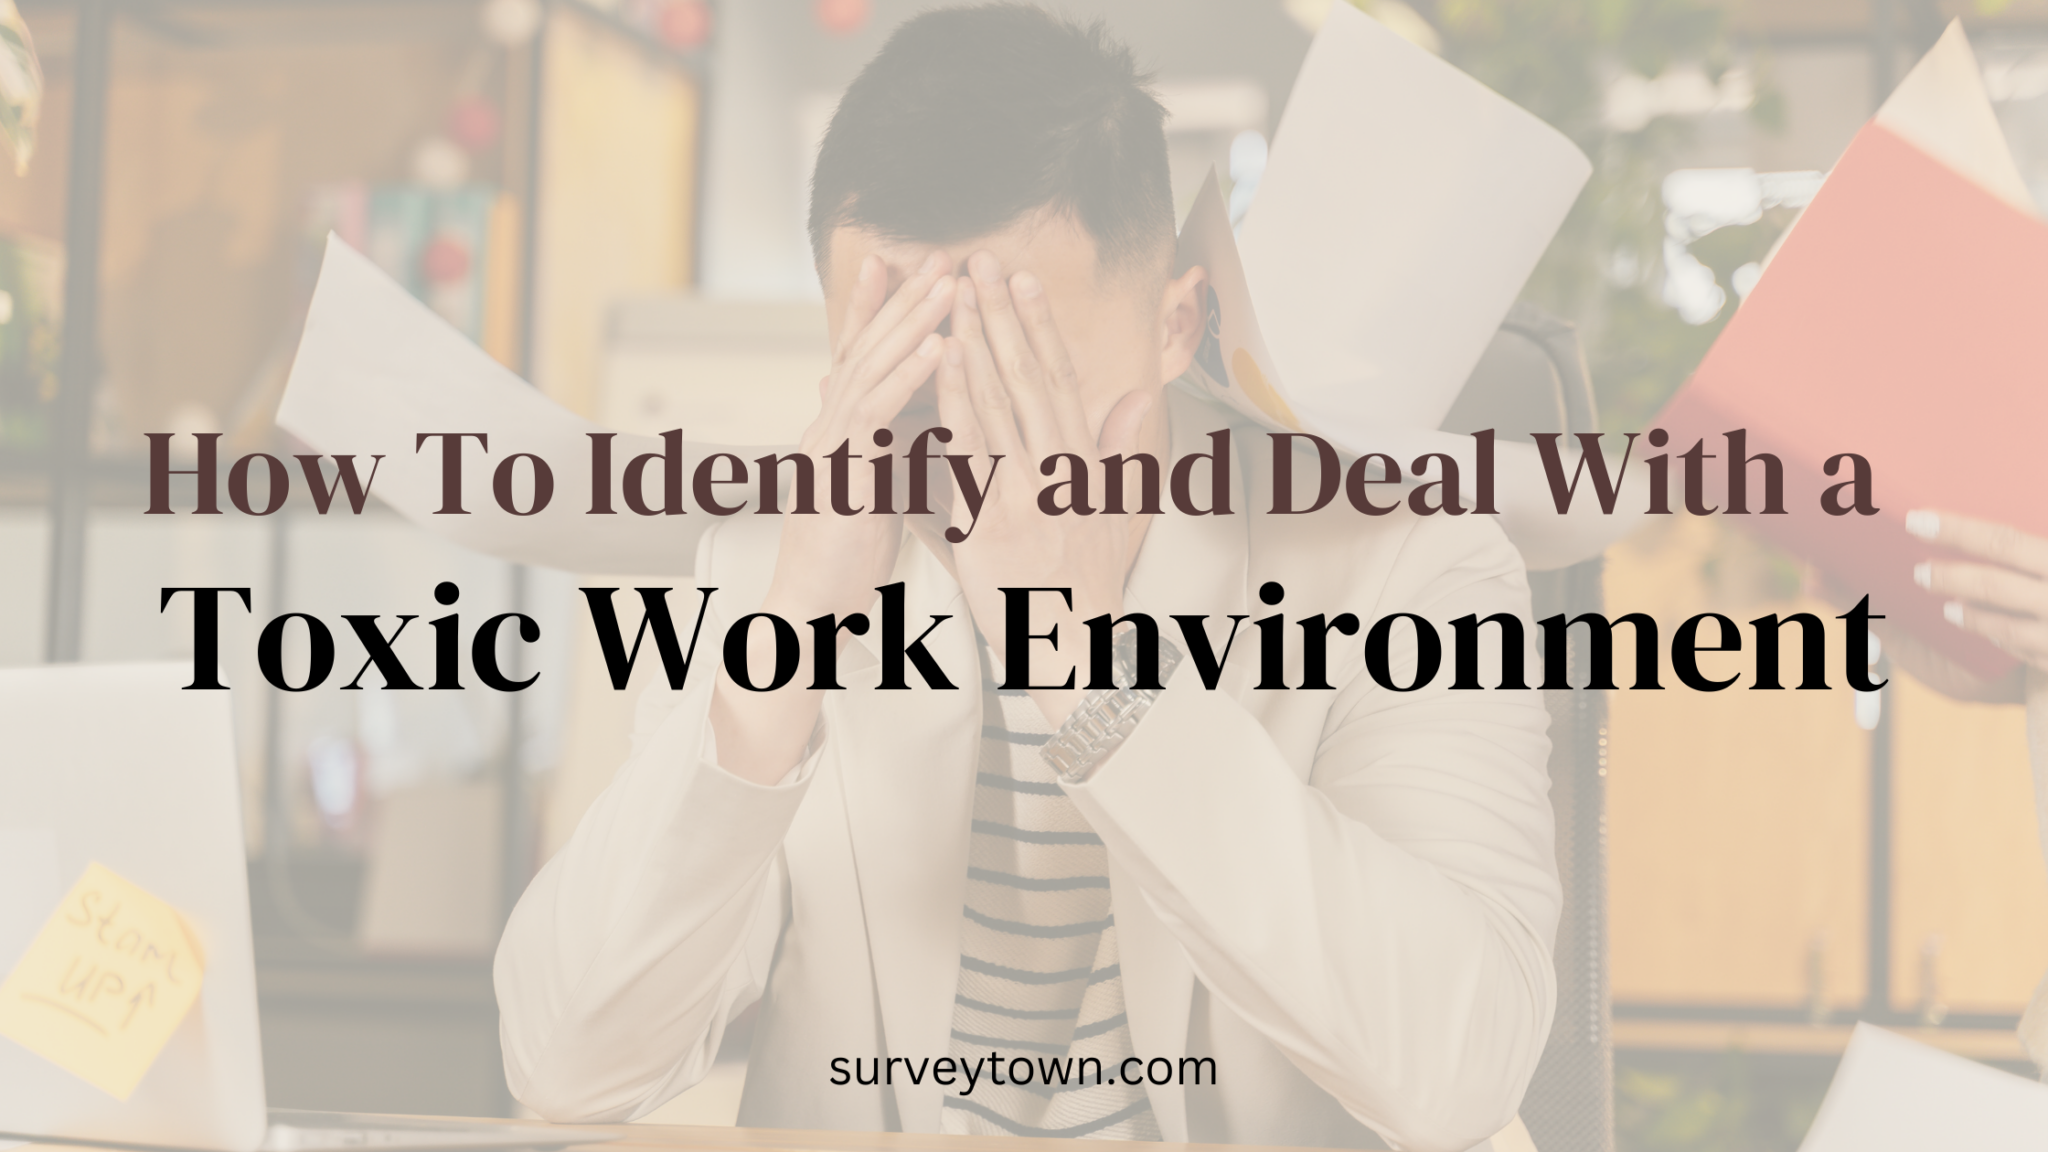 Deal With a Toxic Work Environment